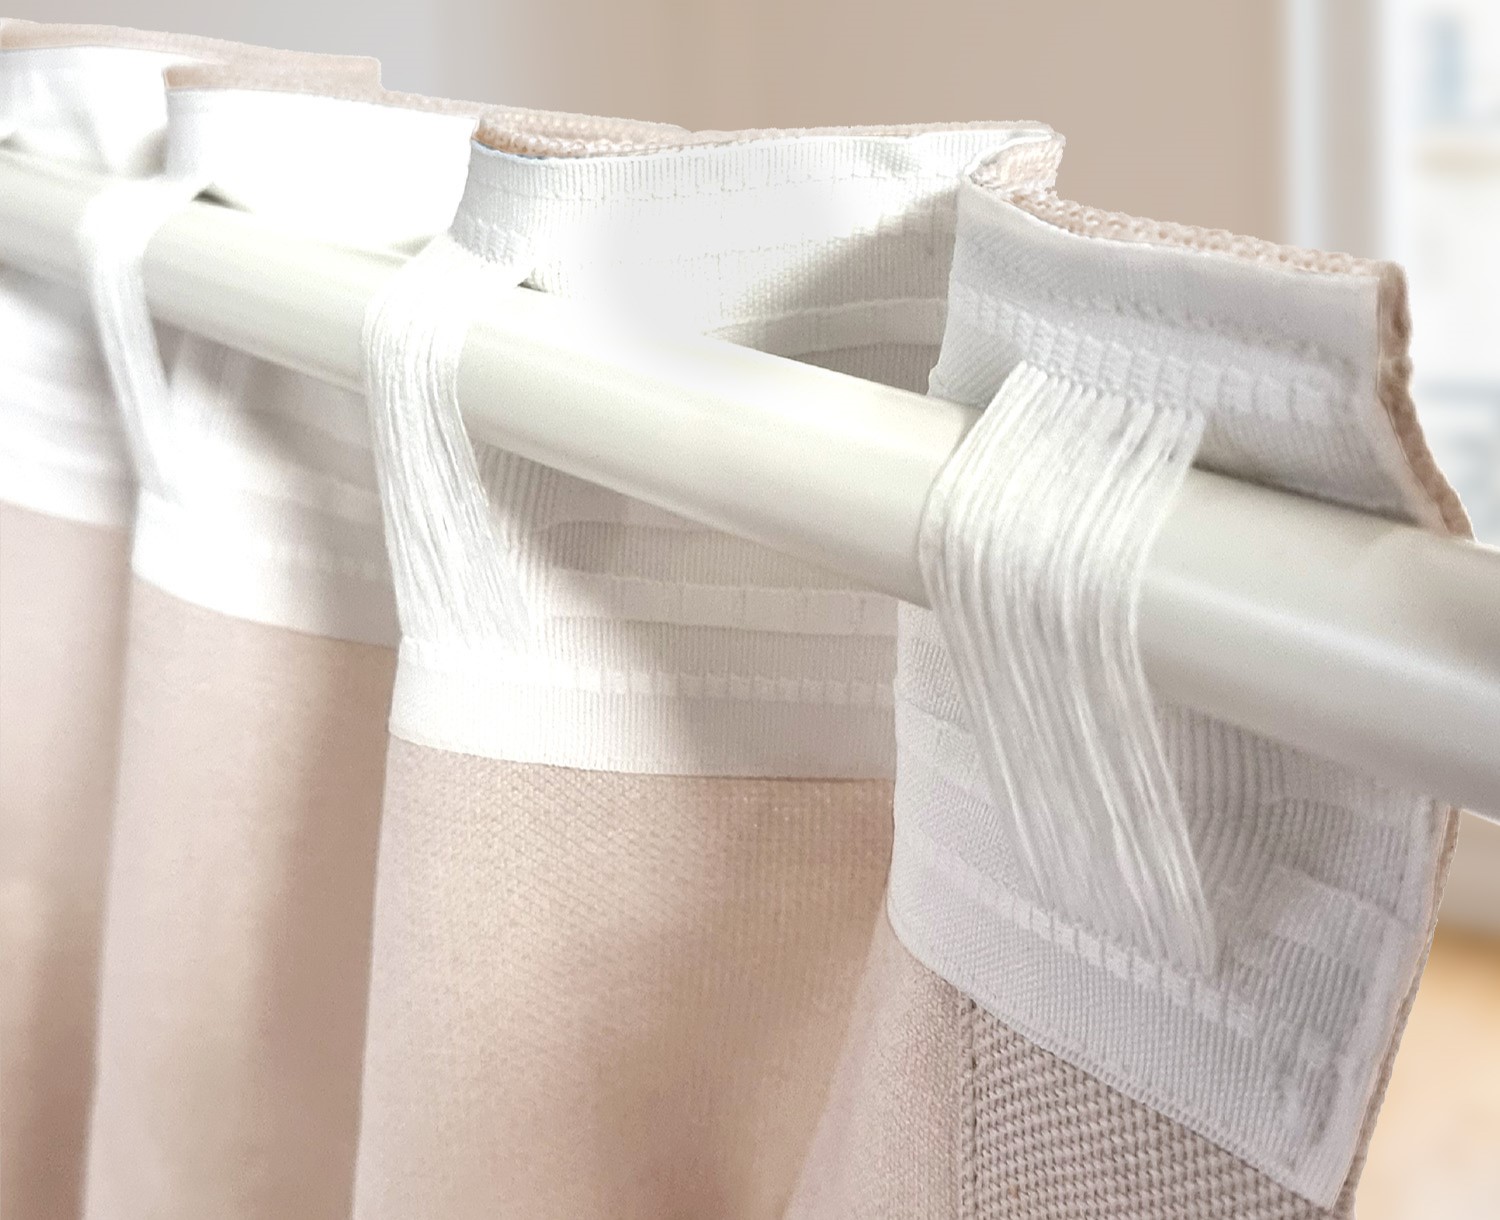 How To Hang Back Tab Curtains